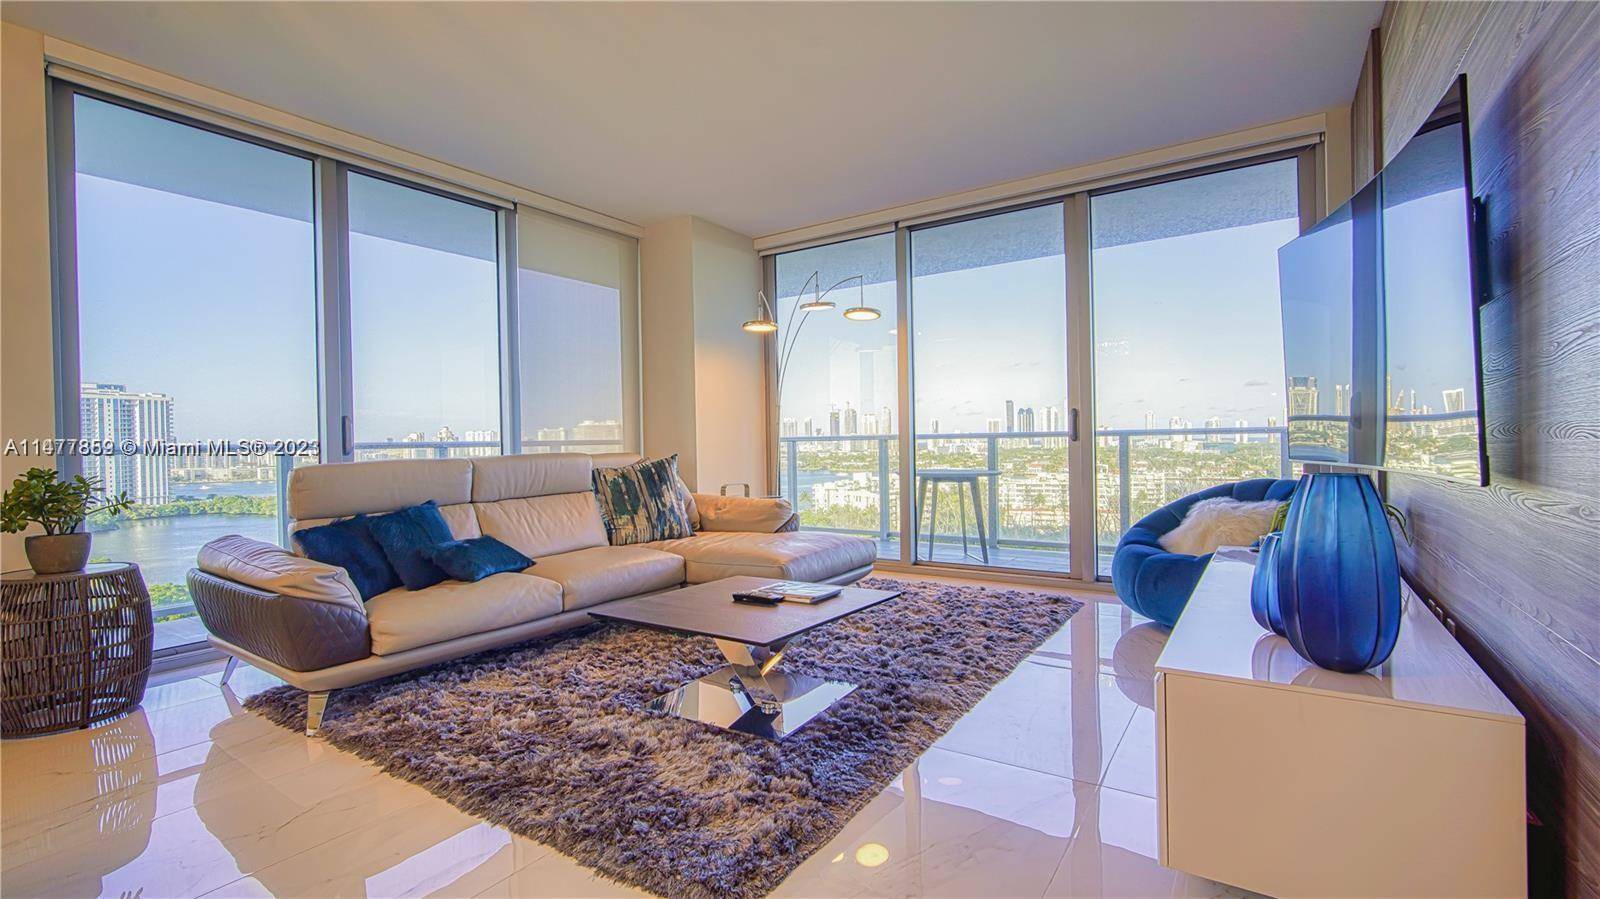 Welcome to Paradise ! Spectacular Furnished well decorated 3bed 3baths corner unit.